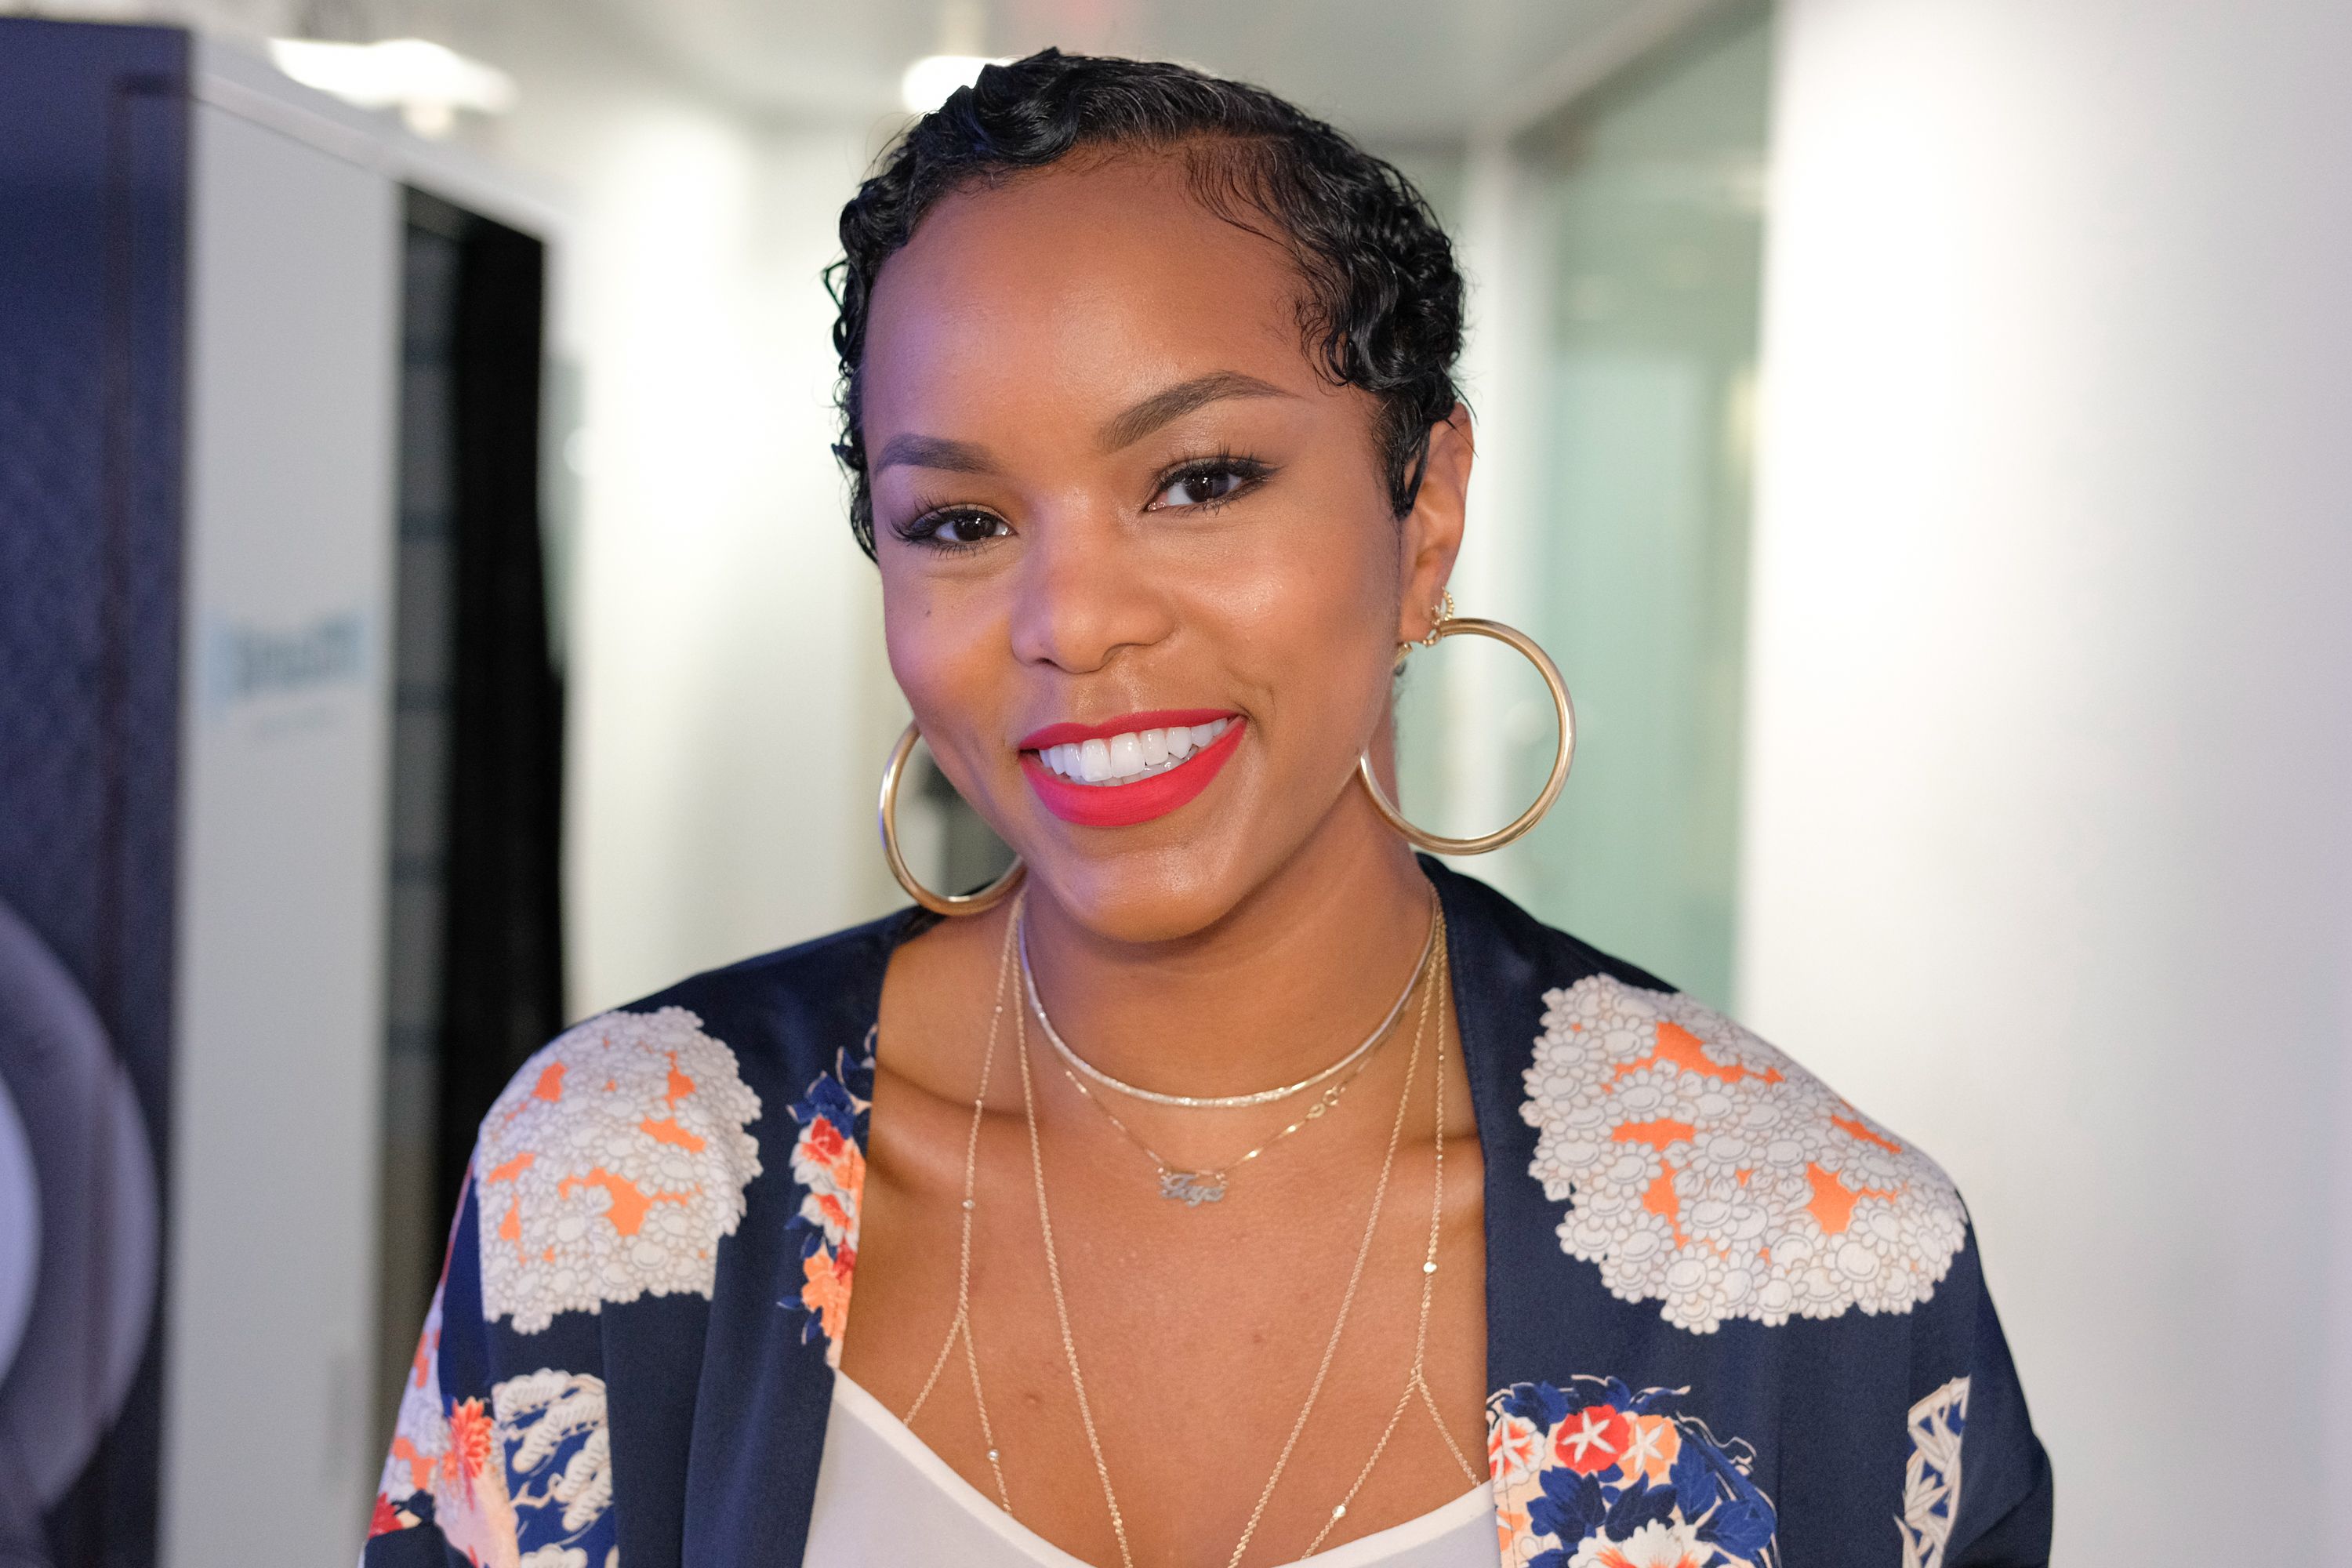 Singer LeToya Luckett visits the SiriusXM Studios on April 19, 2017 | Photo: Getty Images